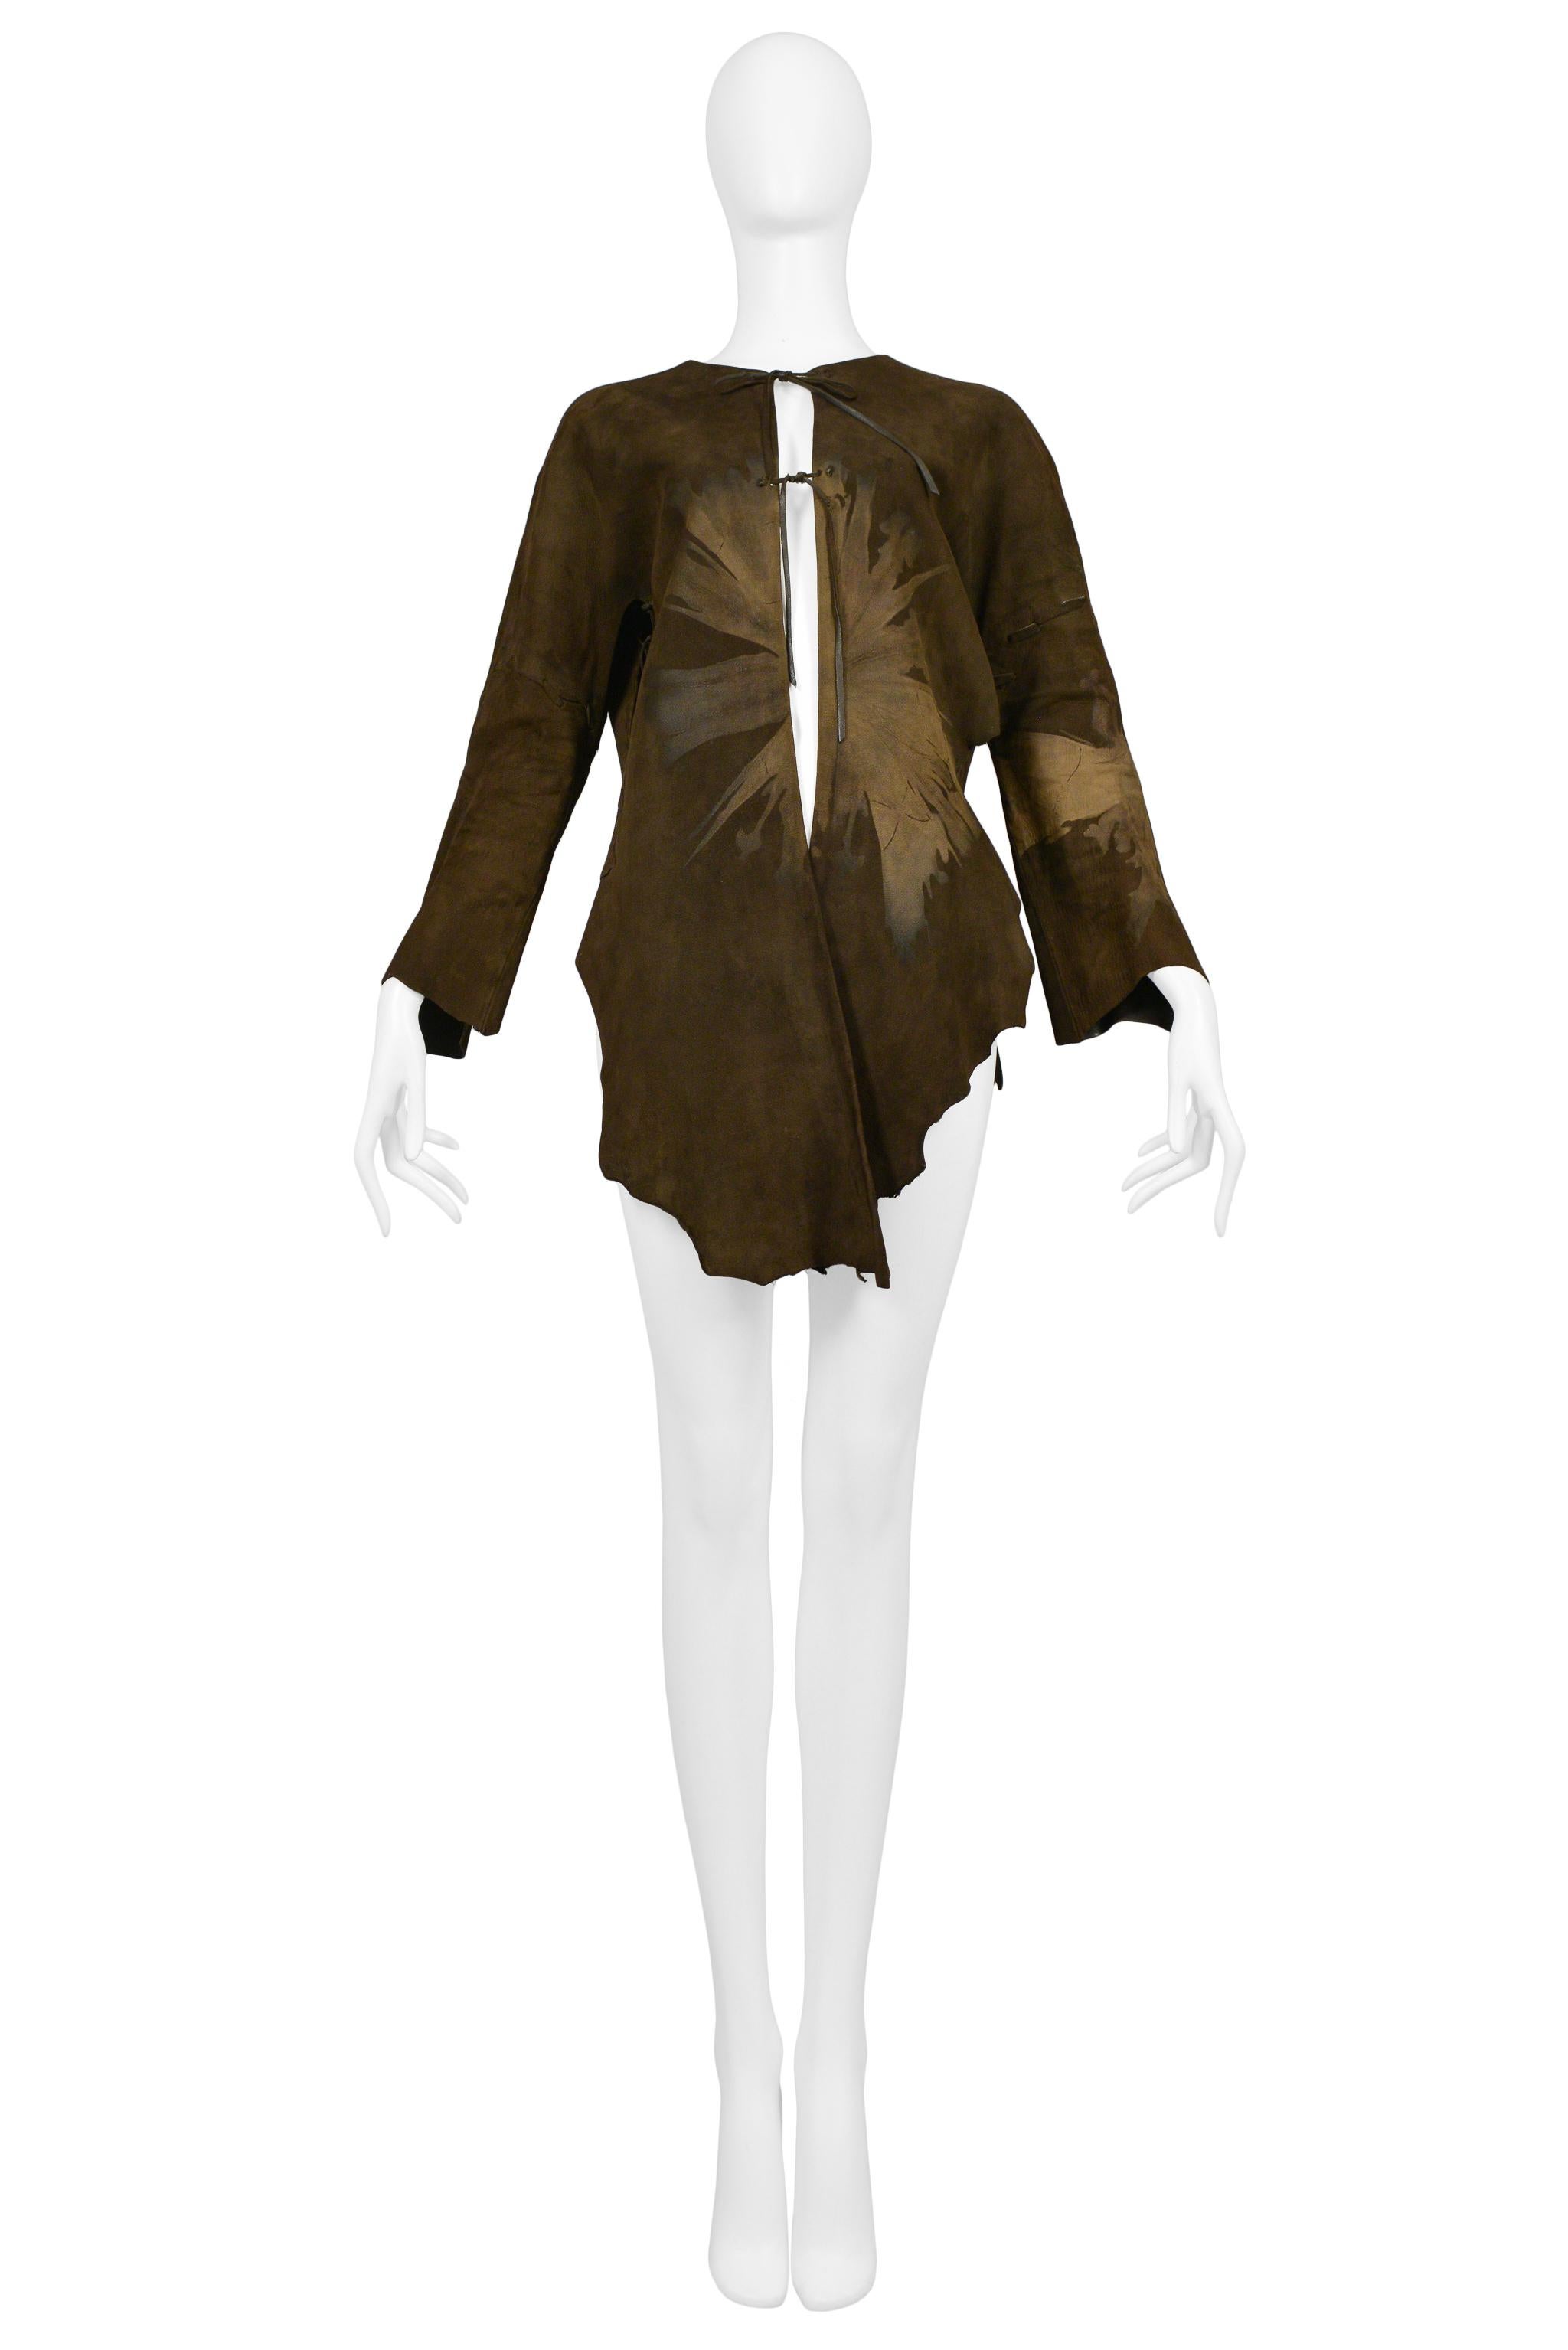 Resurrection Vintage is excited to offer a vintage brown suede Giorgio Sant Angelo jacket and skirt ensemble featuring an abstract leaf print, a jacket with ties at front and raw edges, and a skirt with raw edges.

Giorgio Sant Angelo
Size: